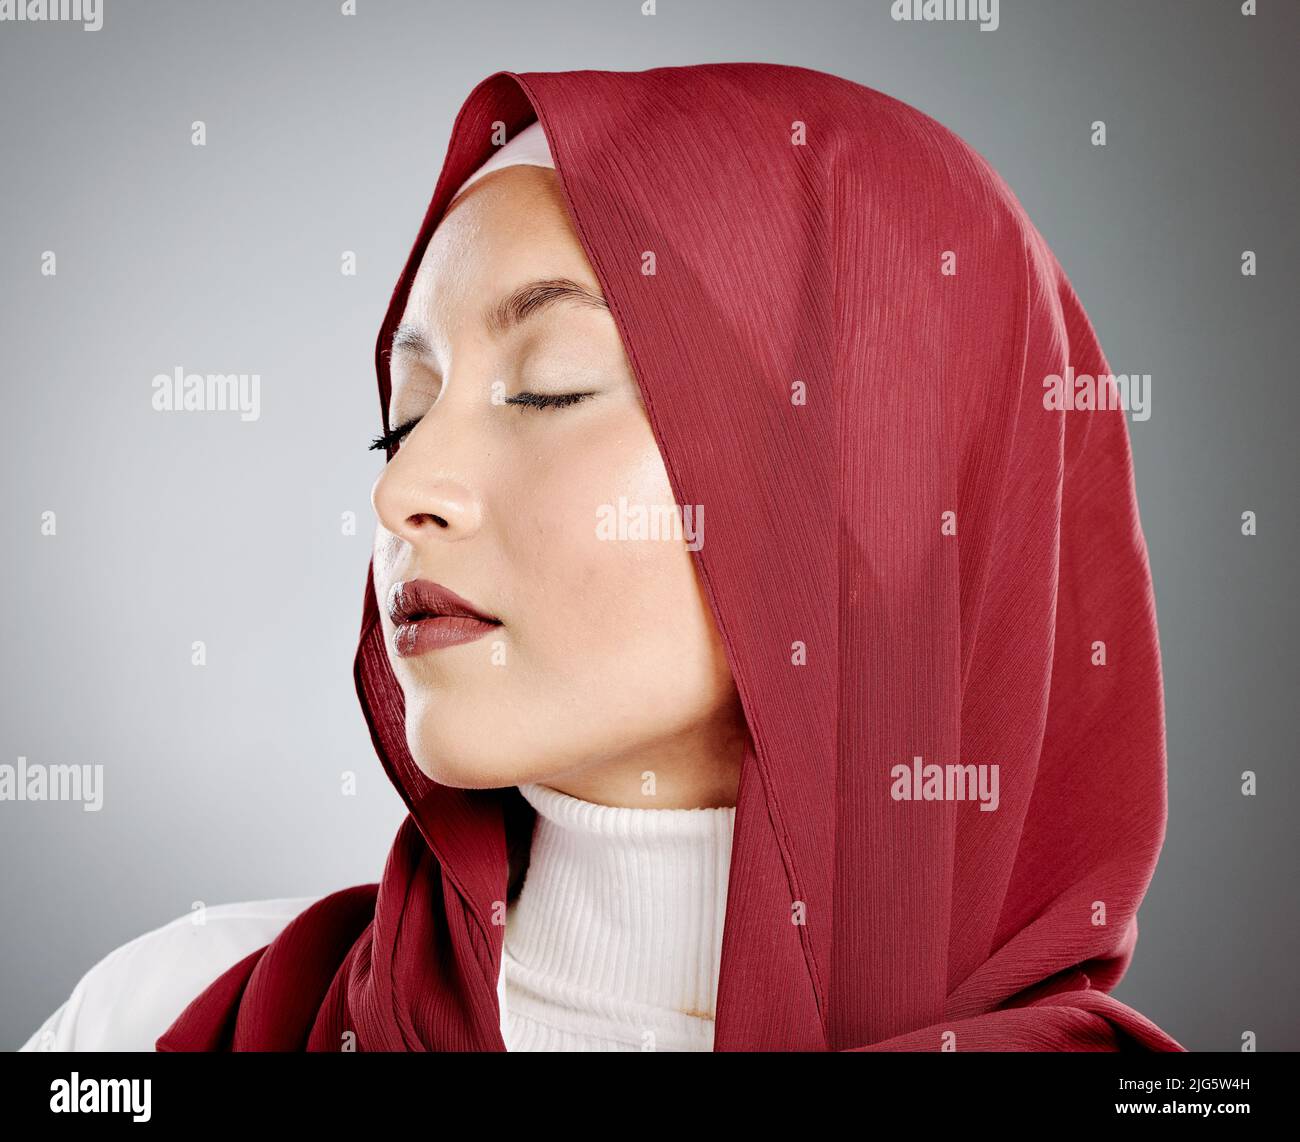 Stylish young muslim woman in a red hijab with her eyes closed on a grey studio background. Middle eastern woman wearing makeup and a headscarf while Stock Photo